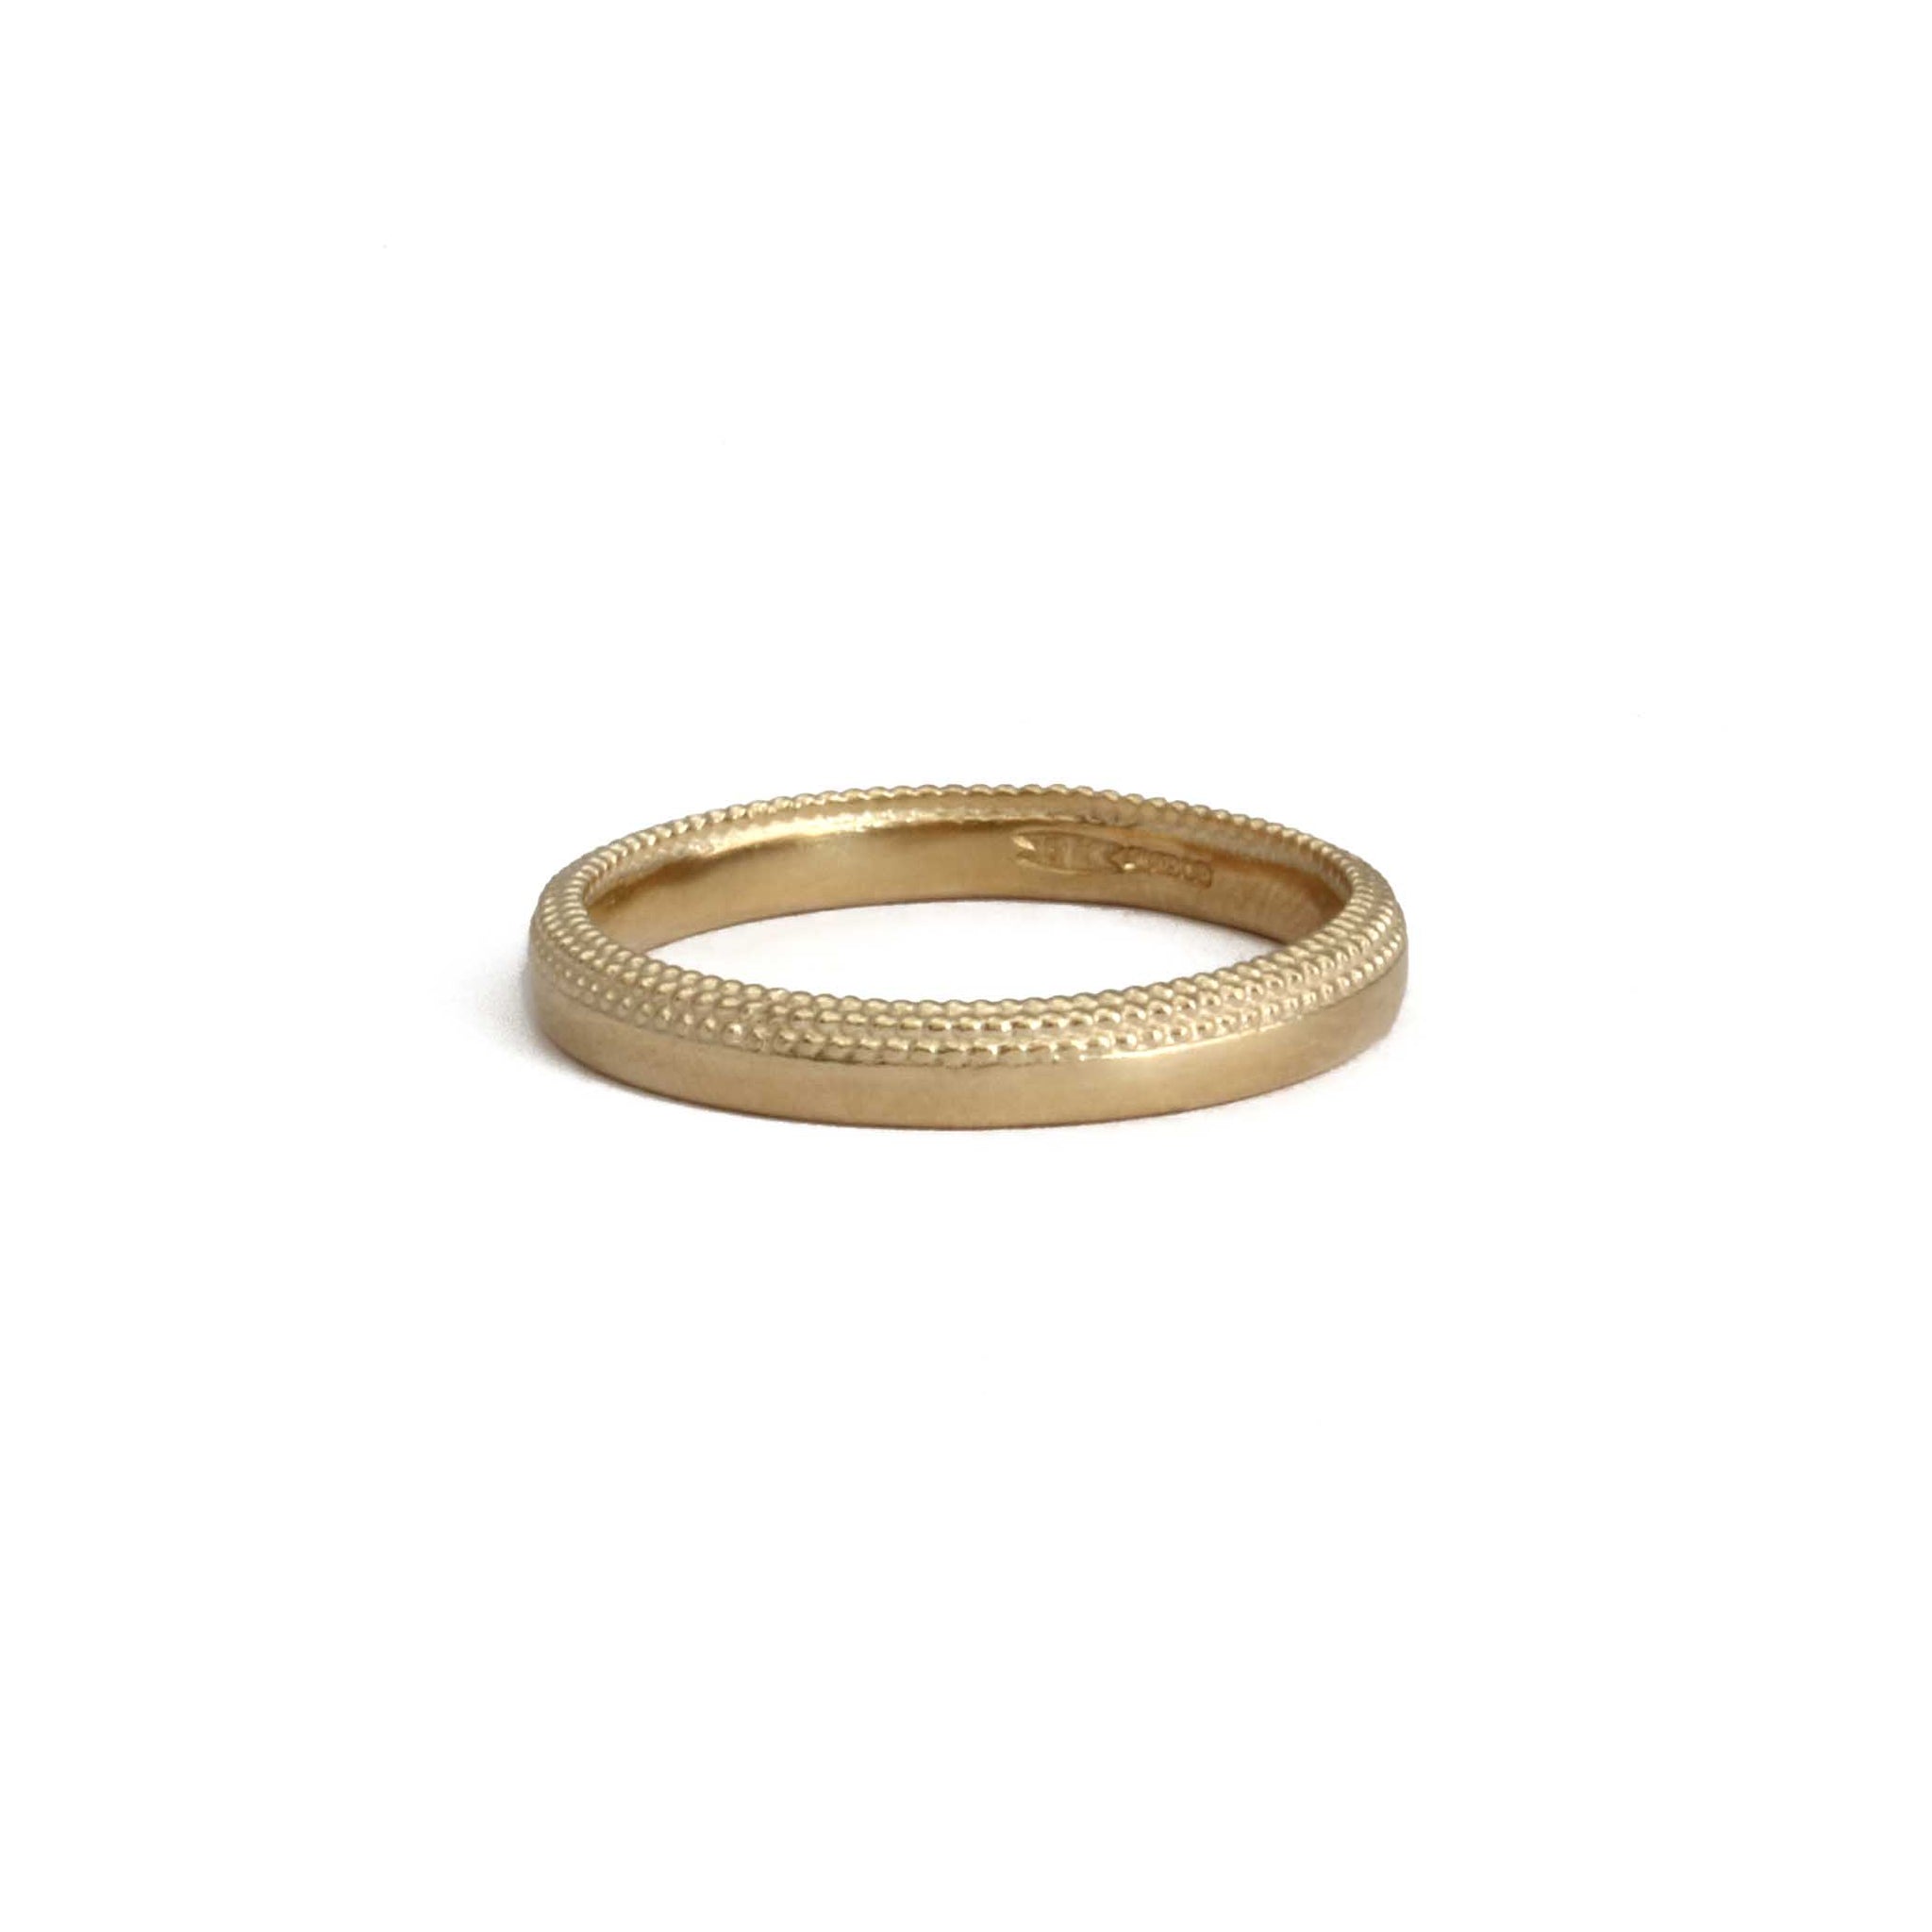 3mm Tyro Fade Band in 9ct yellow gold